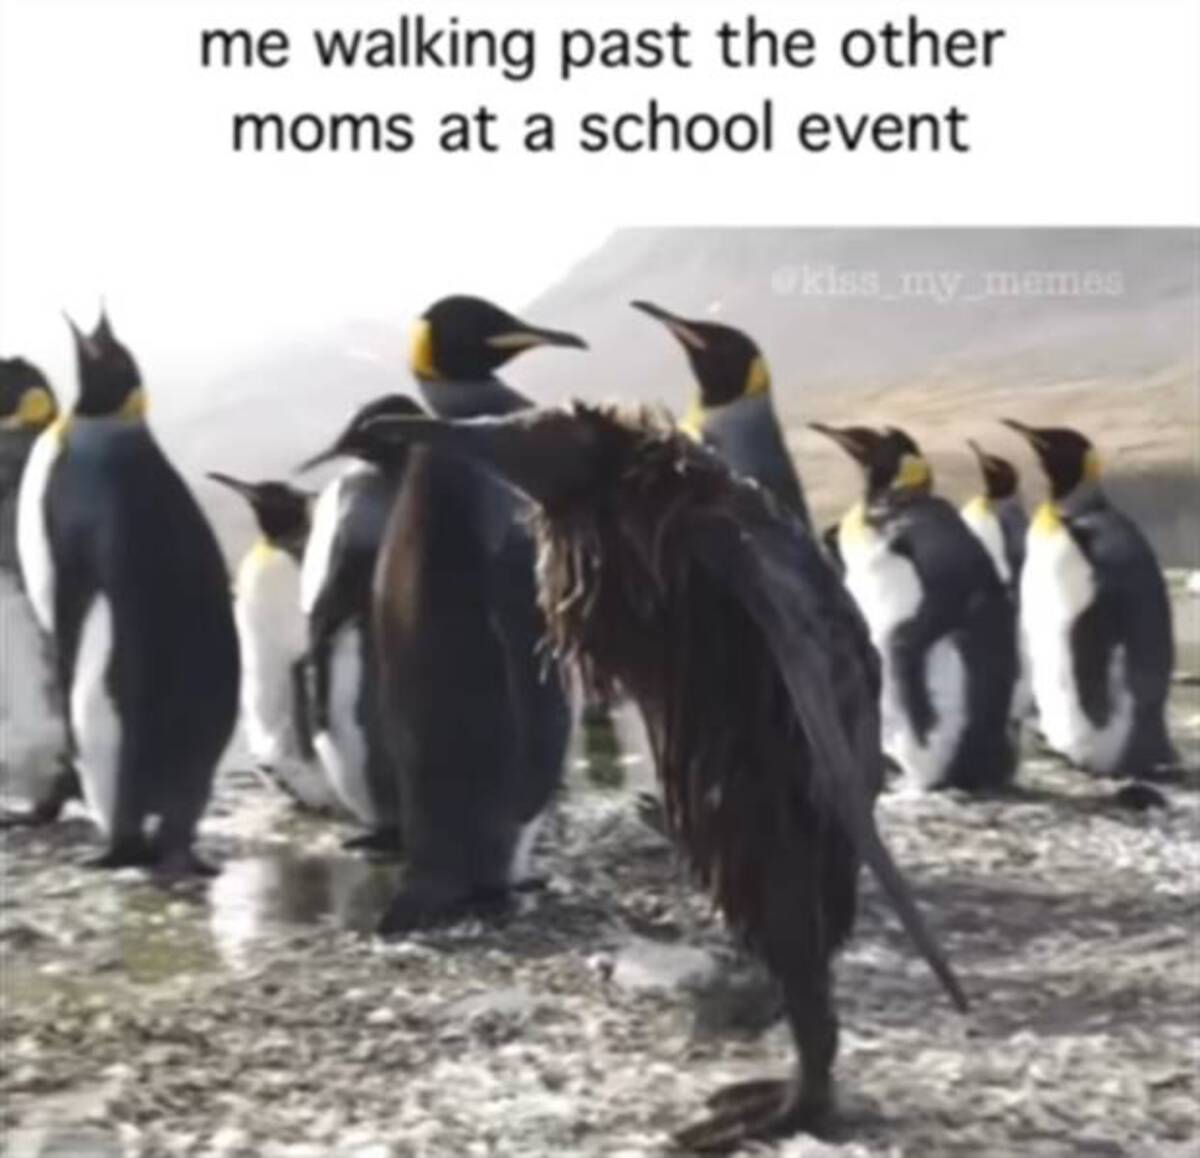 emperor penguin - me walking past the other moms at a school event